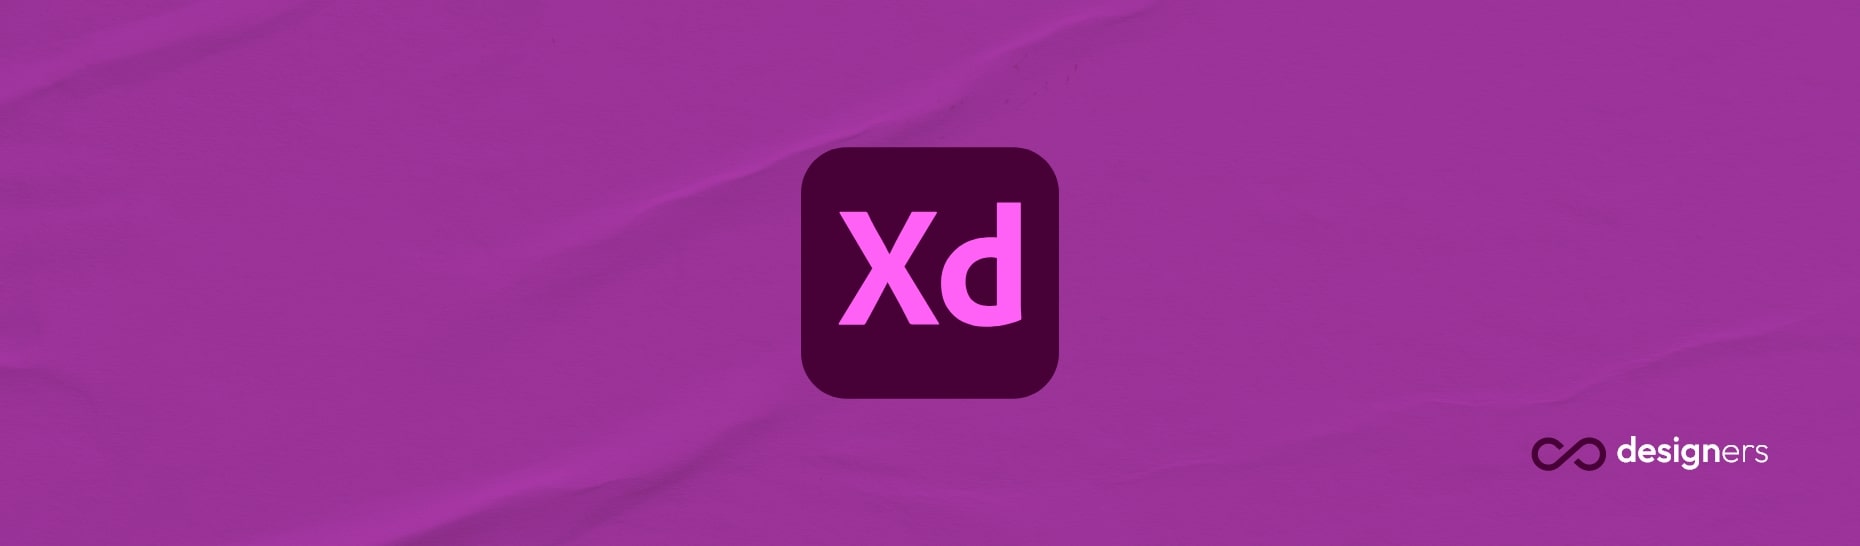 Is Adobe XD discontinued?